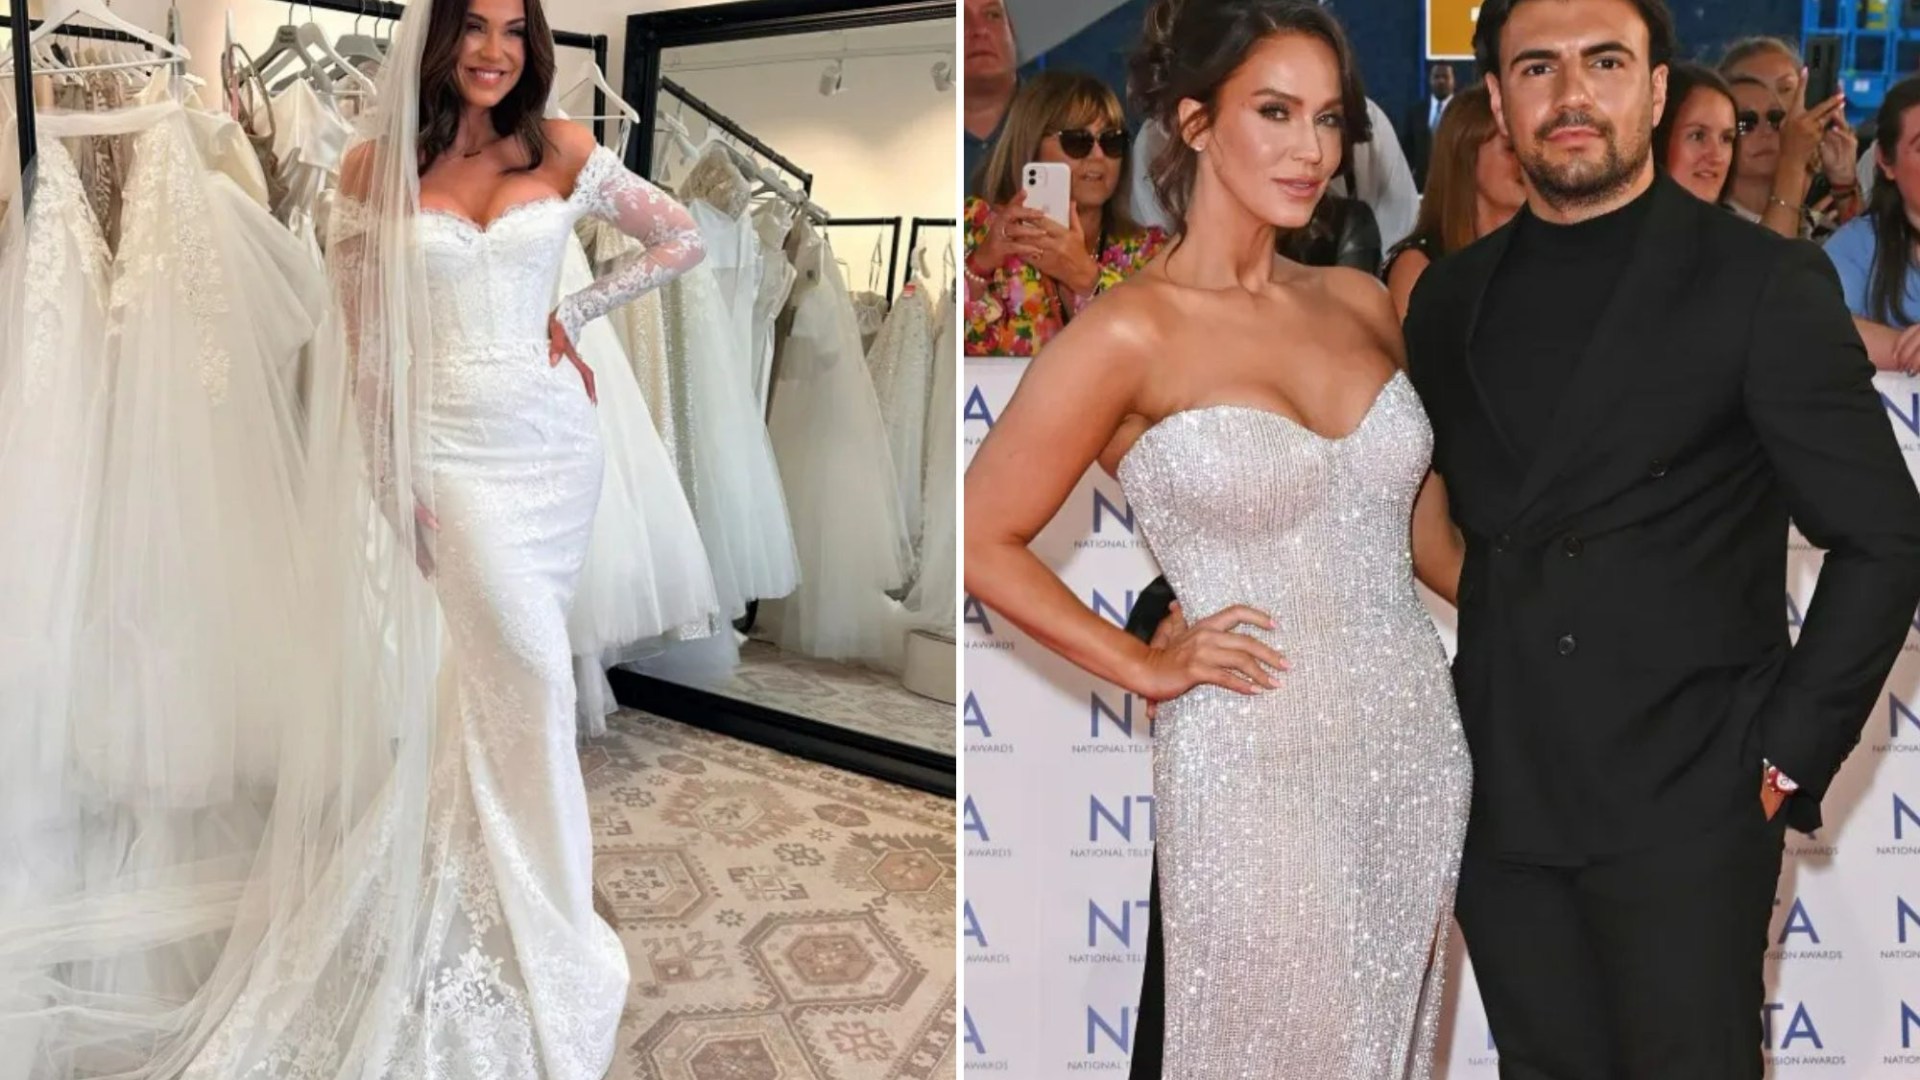 Vicky Pattison reveals her wedding is costing as much as a HOUSE – saying ‘I want everyone to talk about it for years’ [Video]